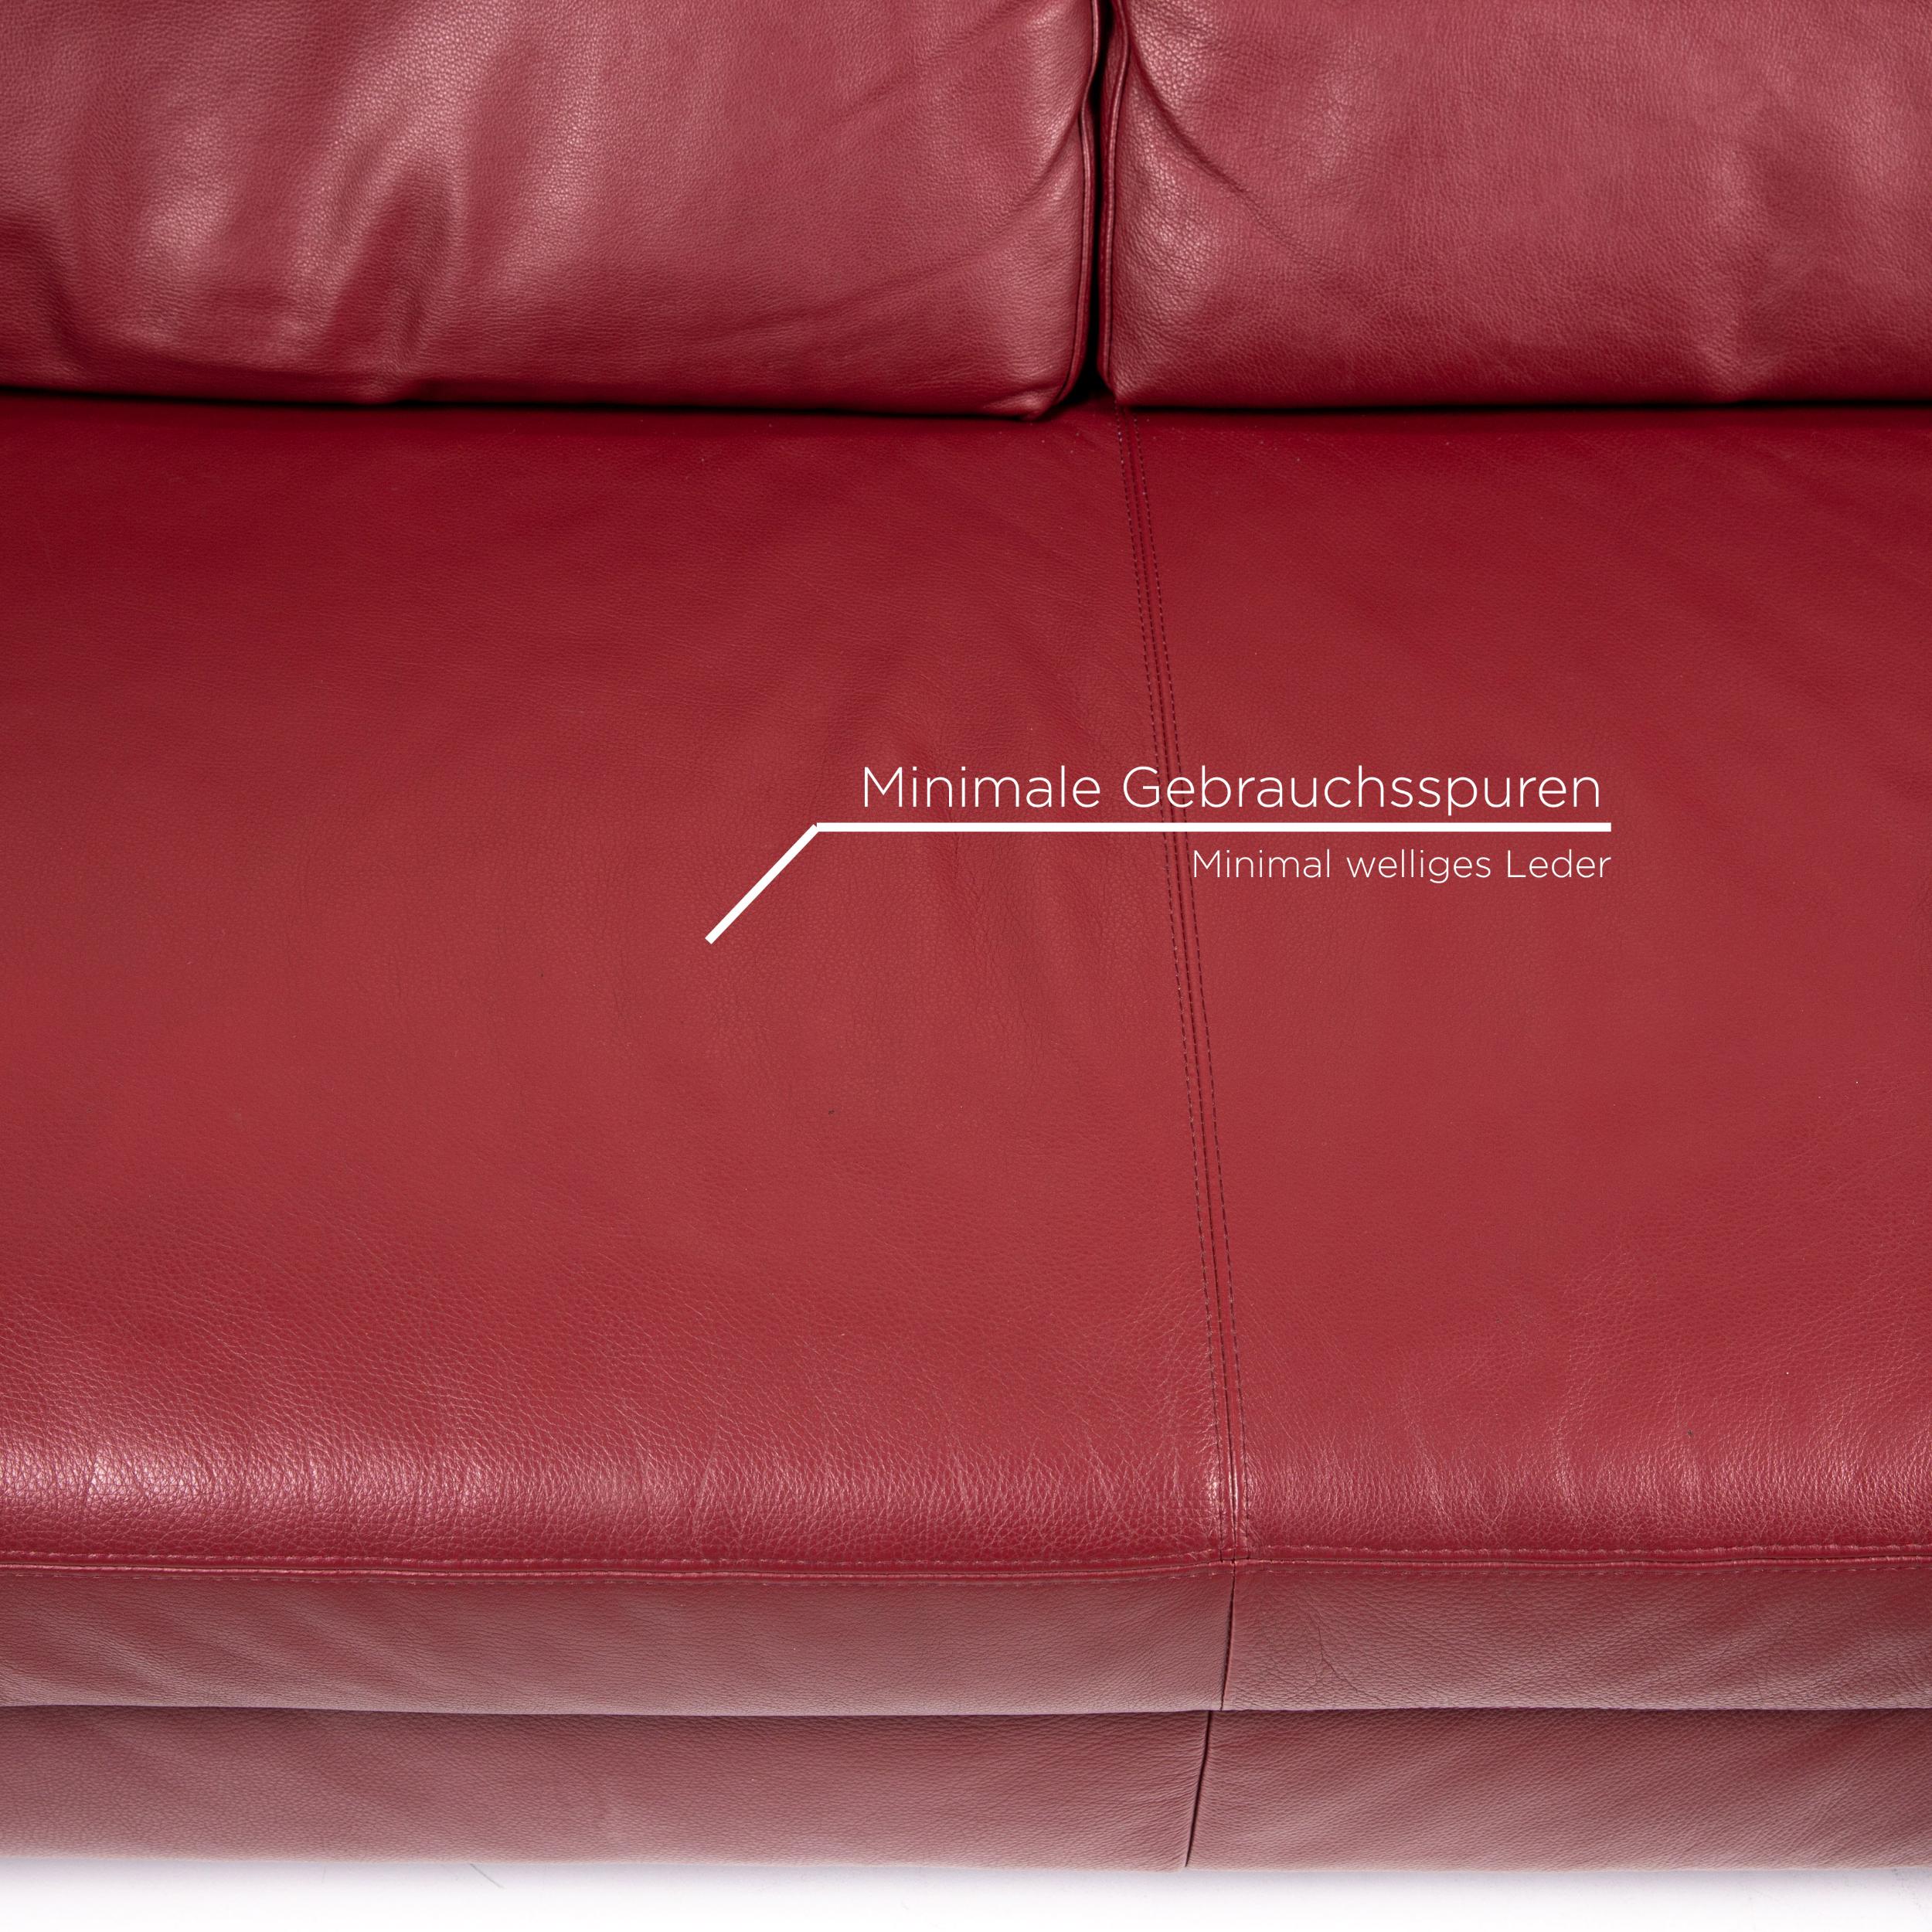 European Musterring Leather Corner Sofa Red Dark Red Sofa Couch For Sale